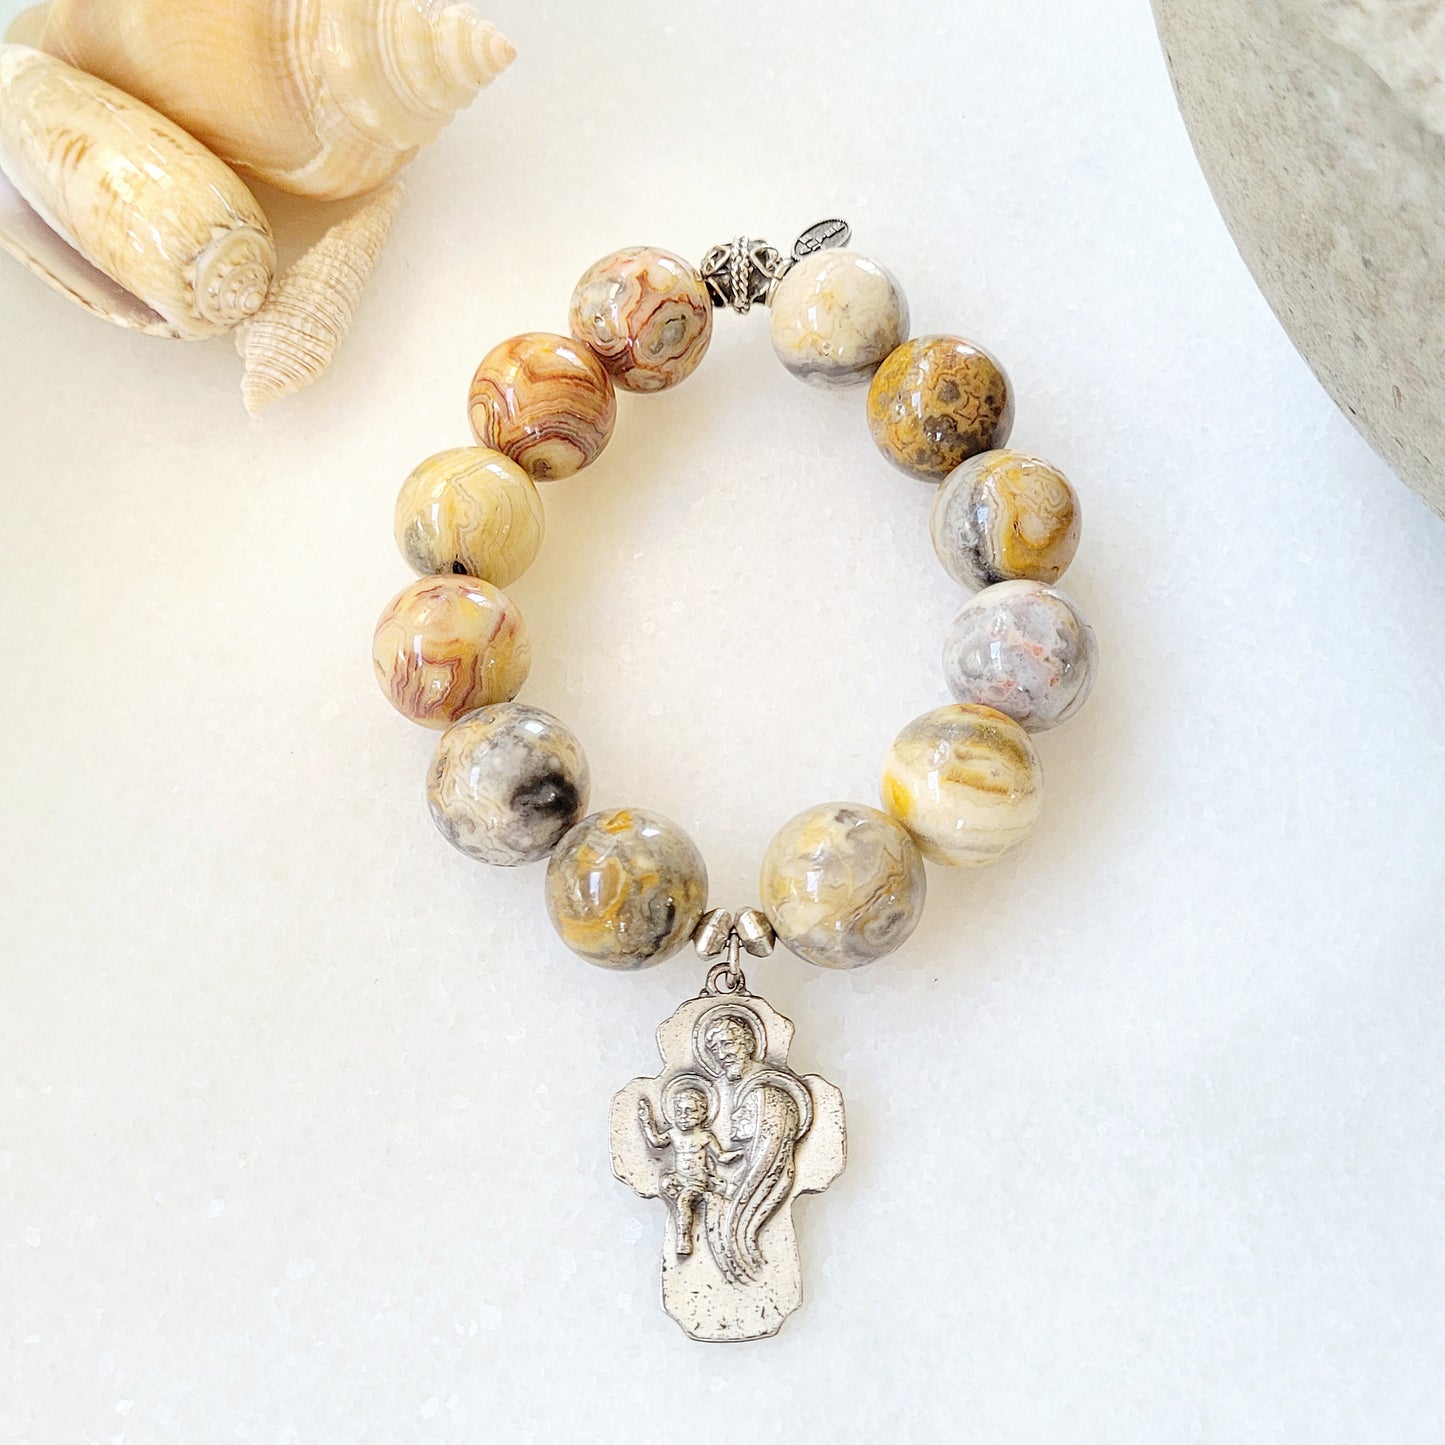 Crazy Lace Agate 16mm Beaded Bracelet w/ Creed Holy Family Vintage Cross Medal - Afterlife Jewelry Designs